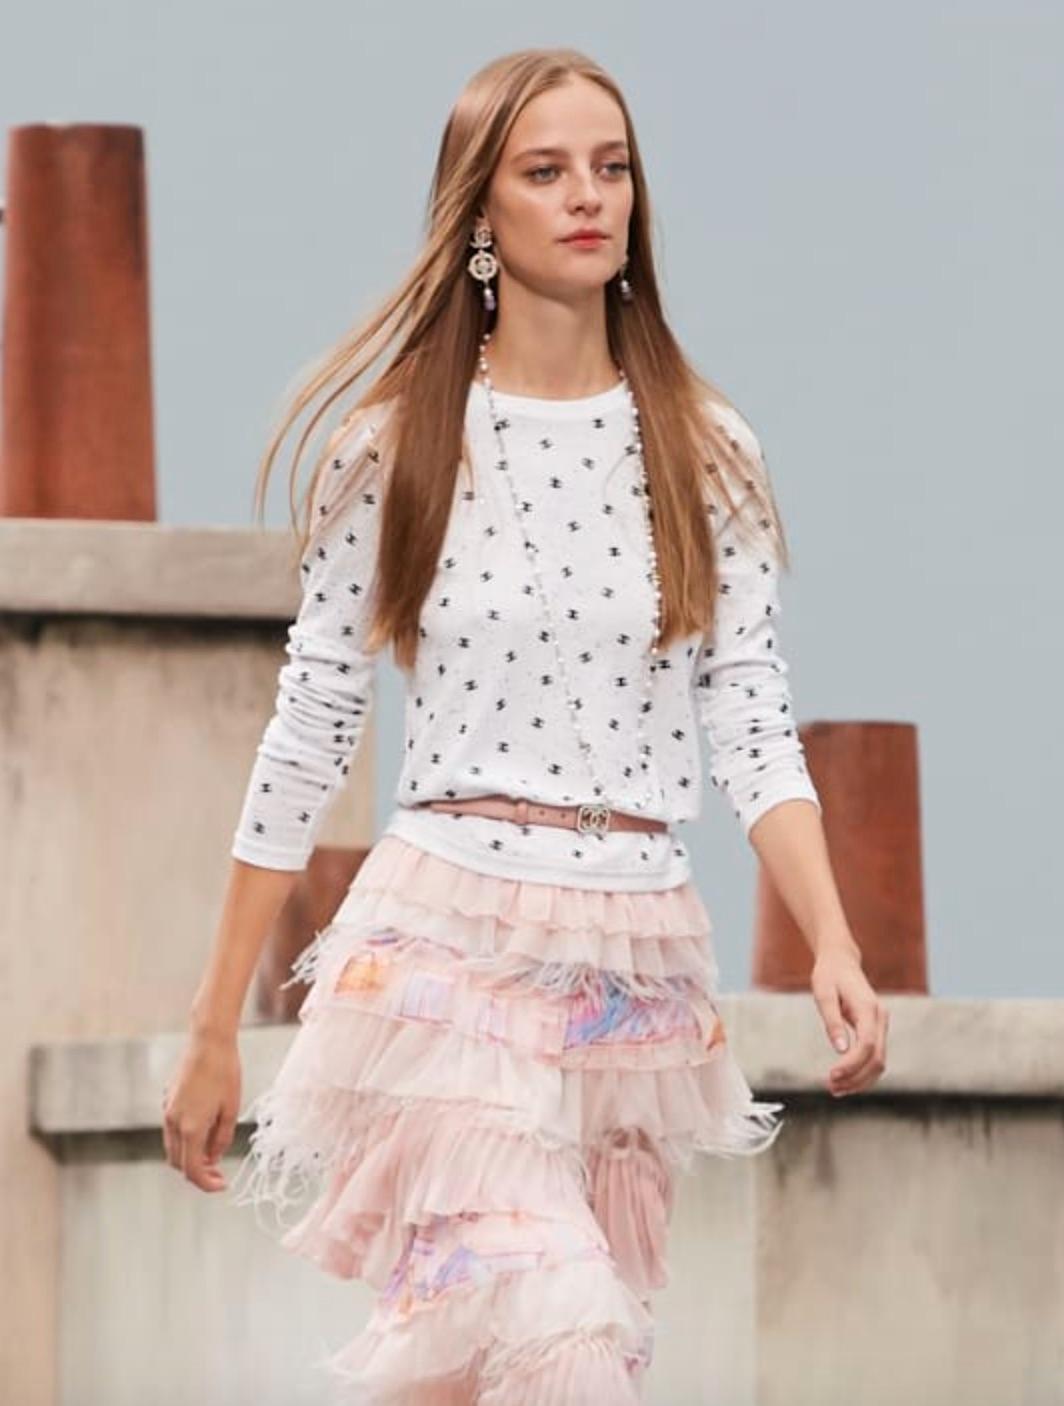 This is the highly sought-after long-sleeved cotton top from Chanel's Spring/Summer 2020 collection, featured as runway look #51. It boasts contrasting black CC logo embroidery and a captivating display of multicolored sparkly sequins.
The top is in